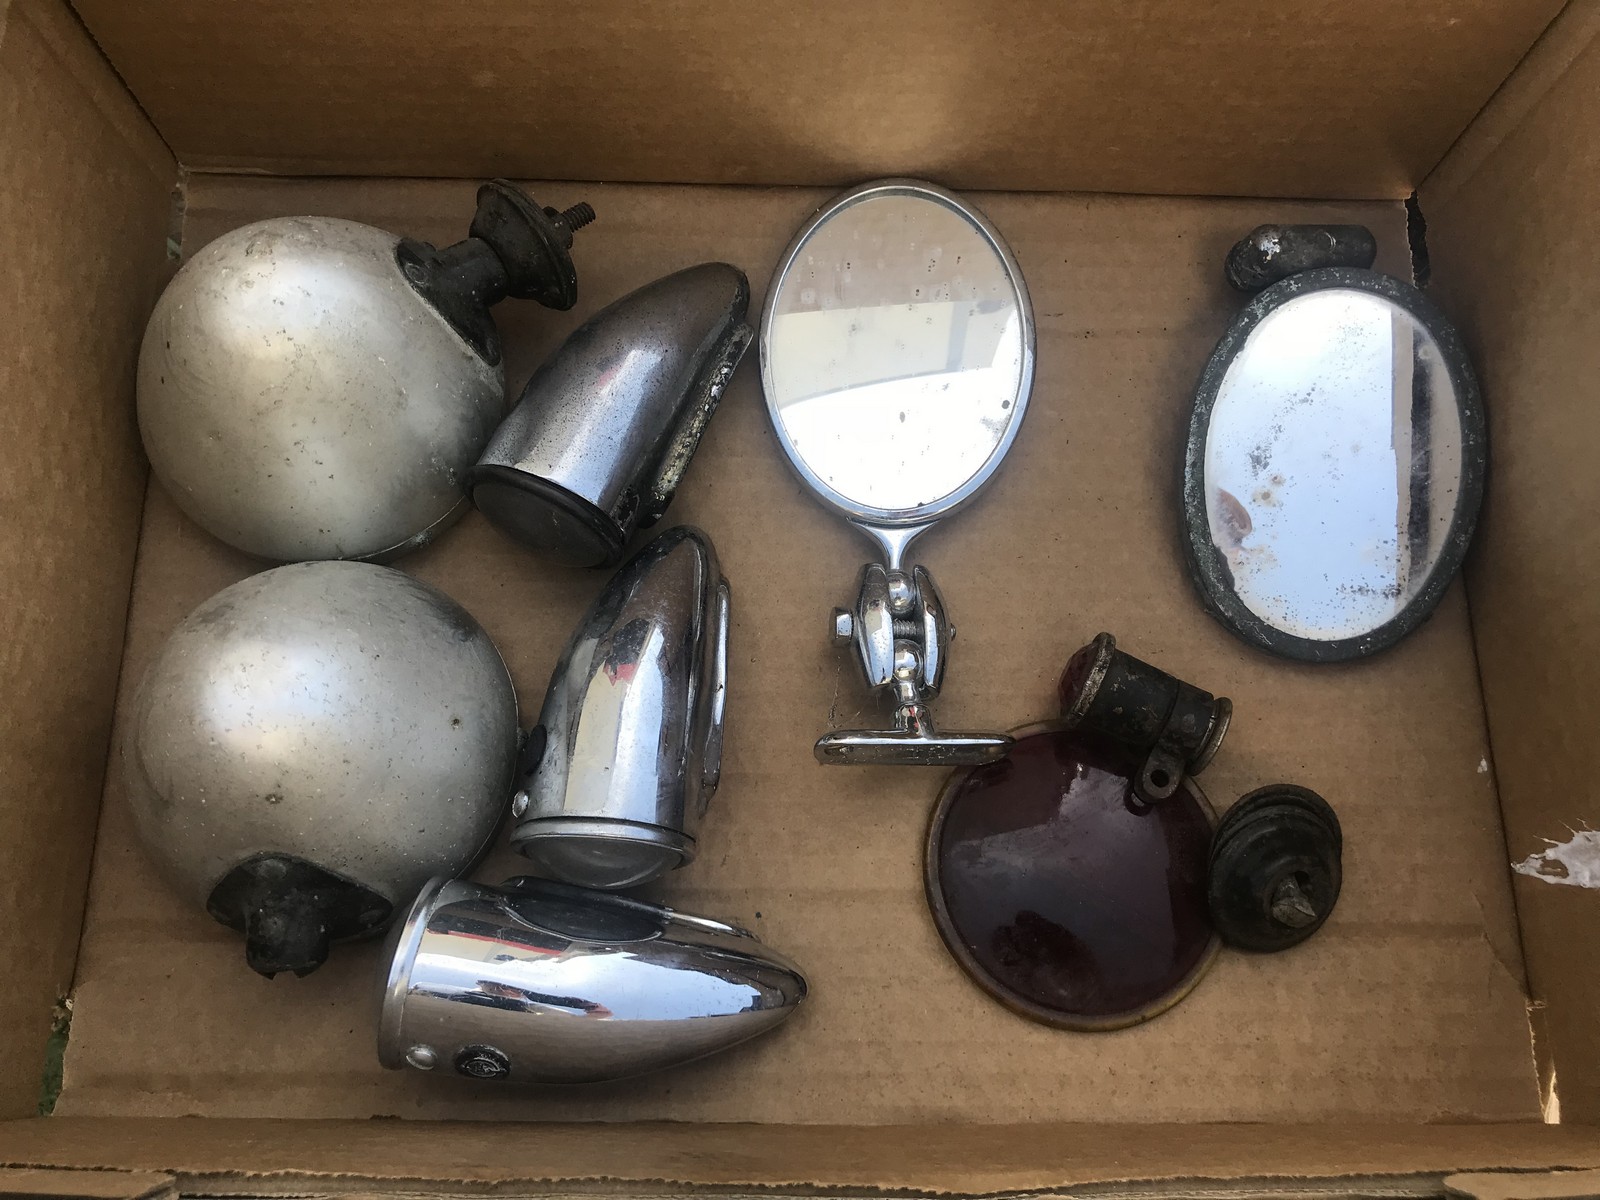 A Desmo oval rear view exterior mirror, one other and various lamps etc.